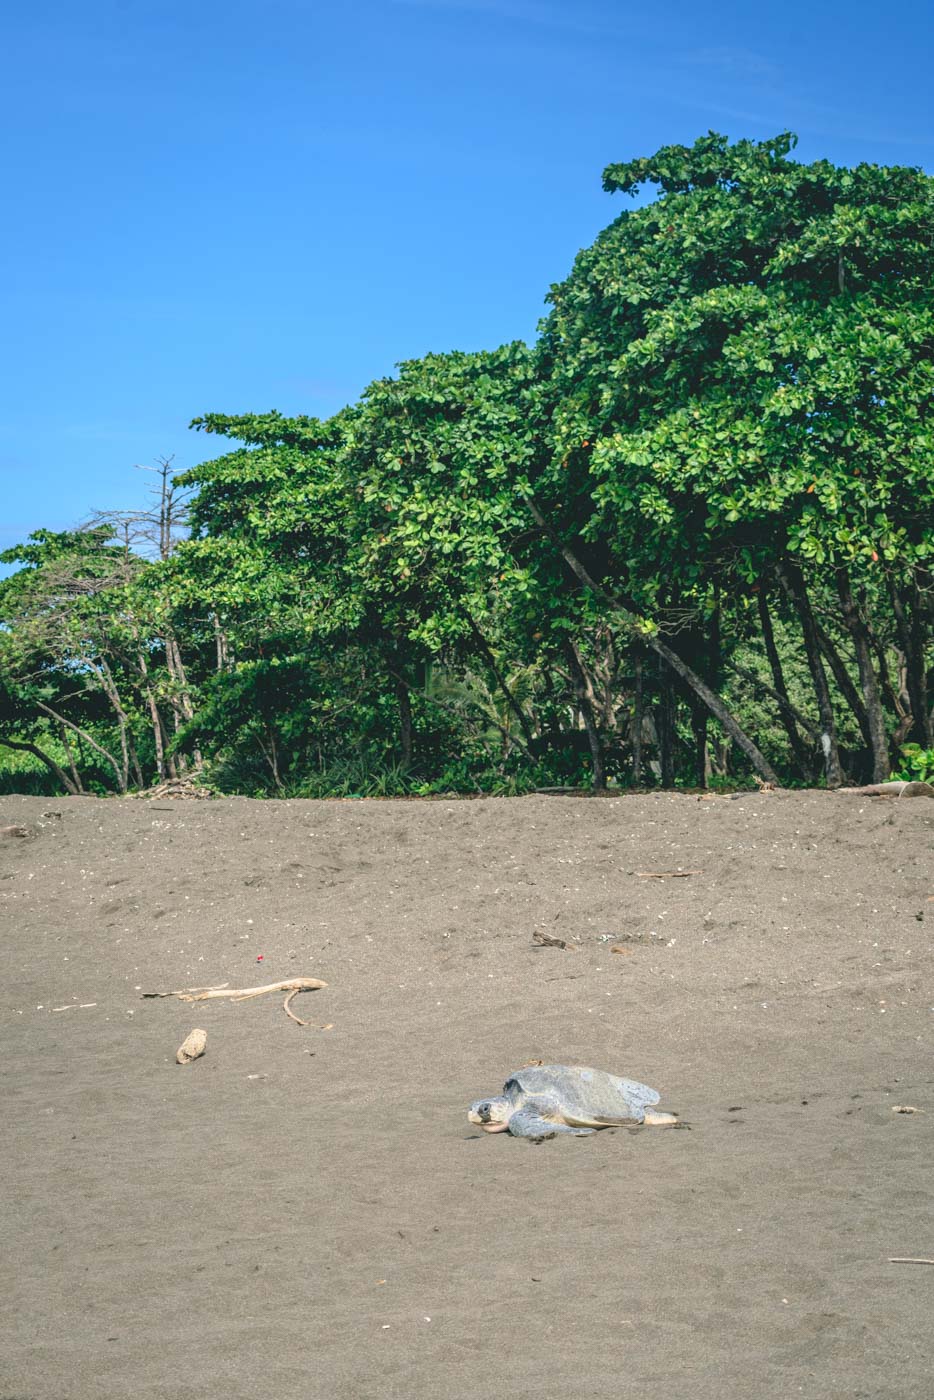 Turles on the beach in Ostional, Costa Rica